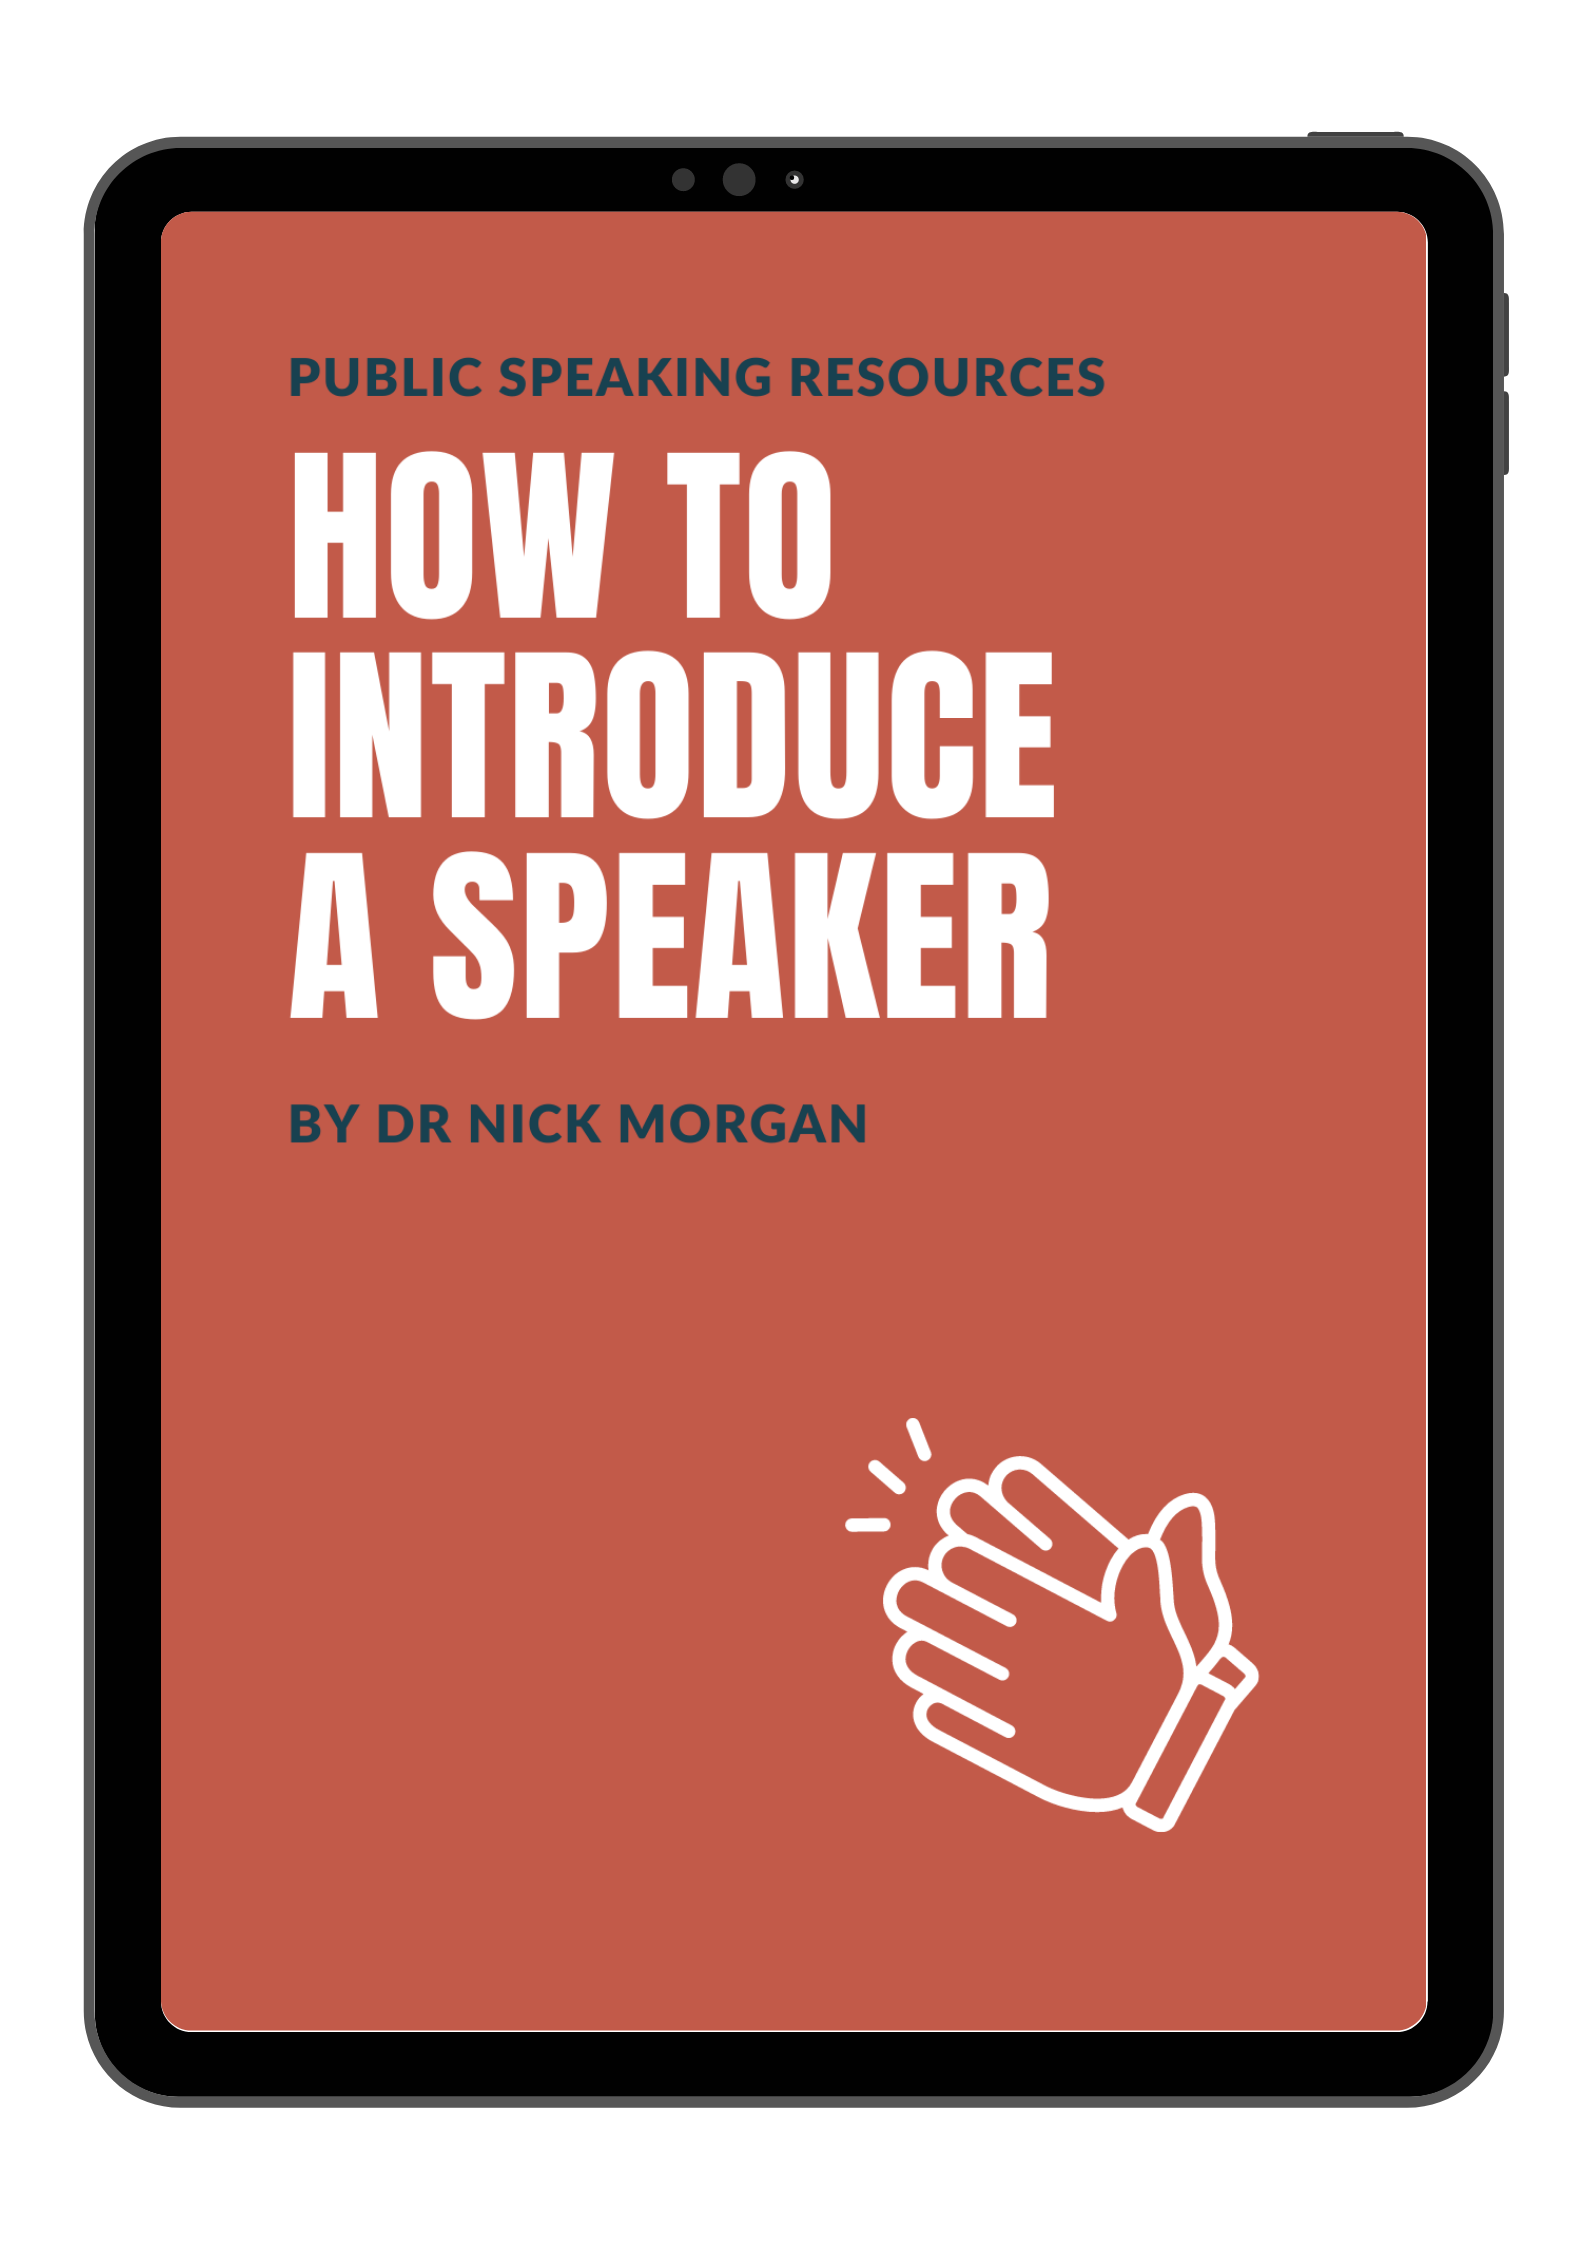 How to introduce a speaker